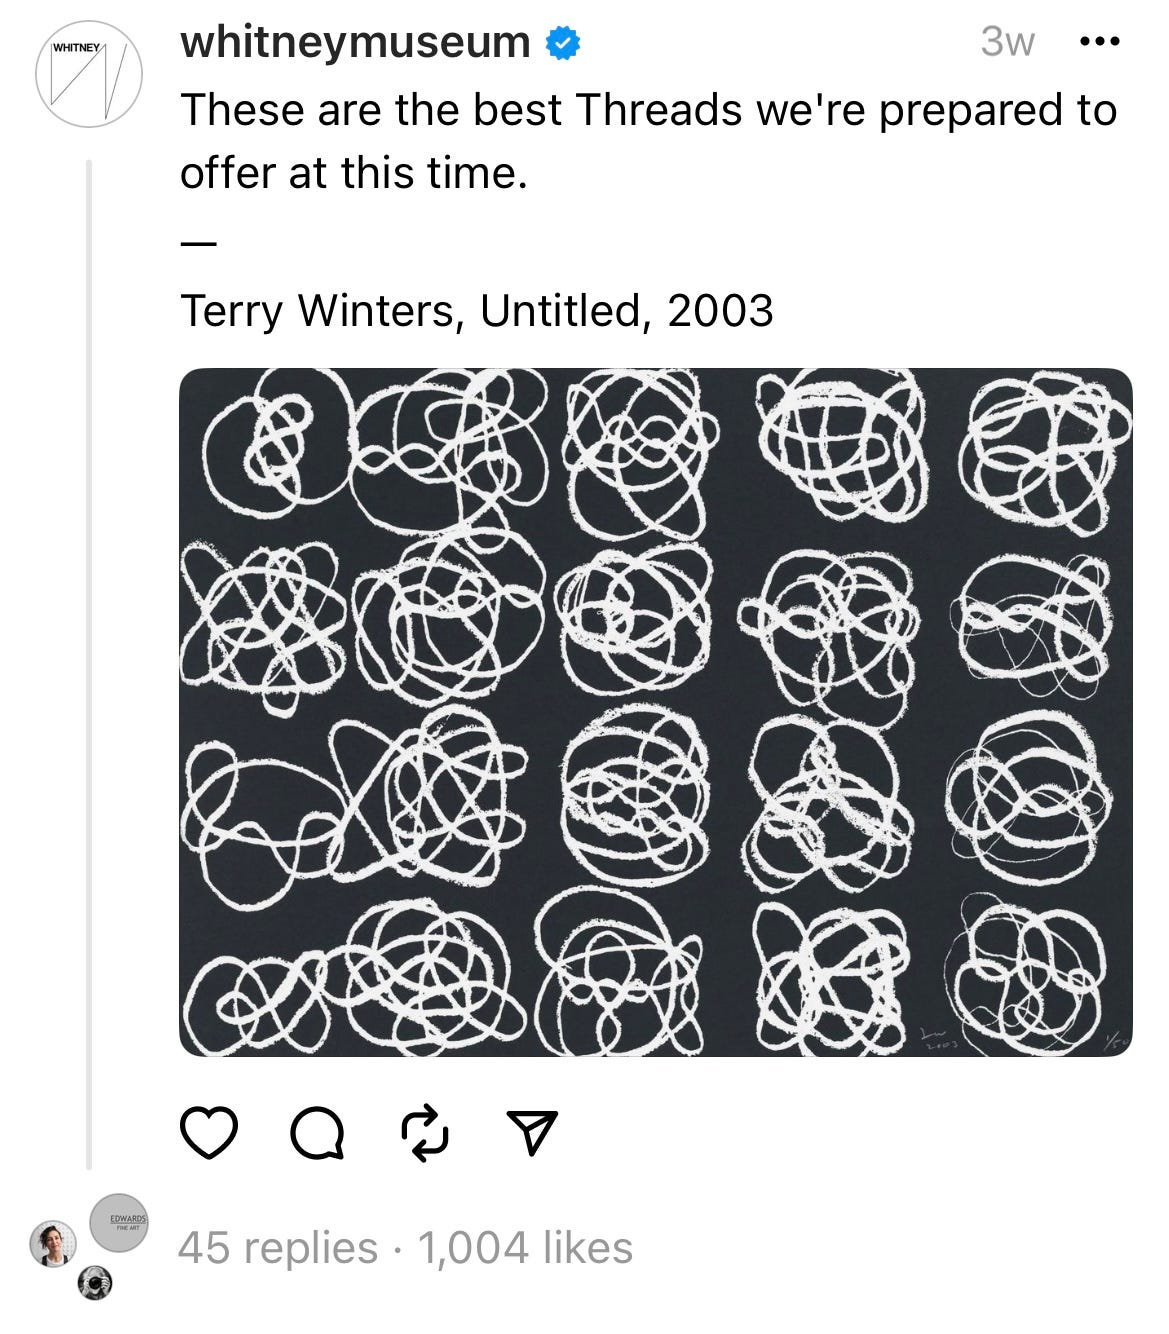 Post that says "These are the best Threads we are prepared to offer at this time" and then art that's a bunch of what looks to be squiggles that look like piles of thread.